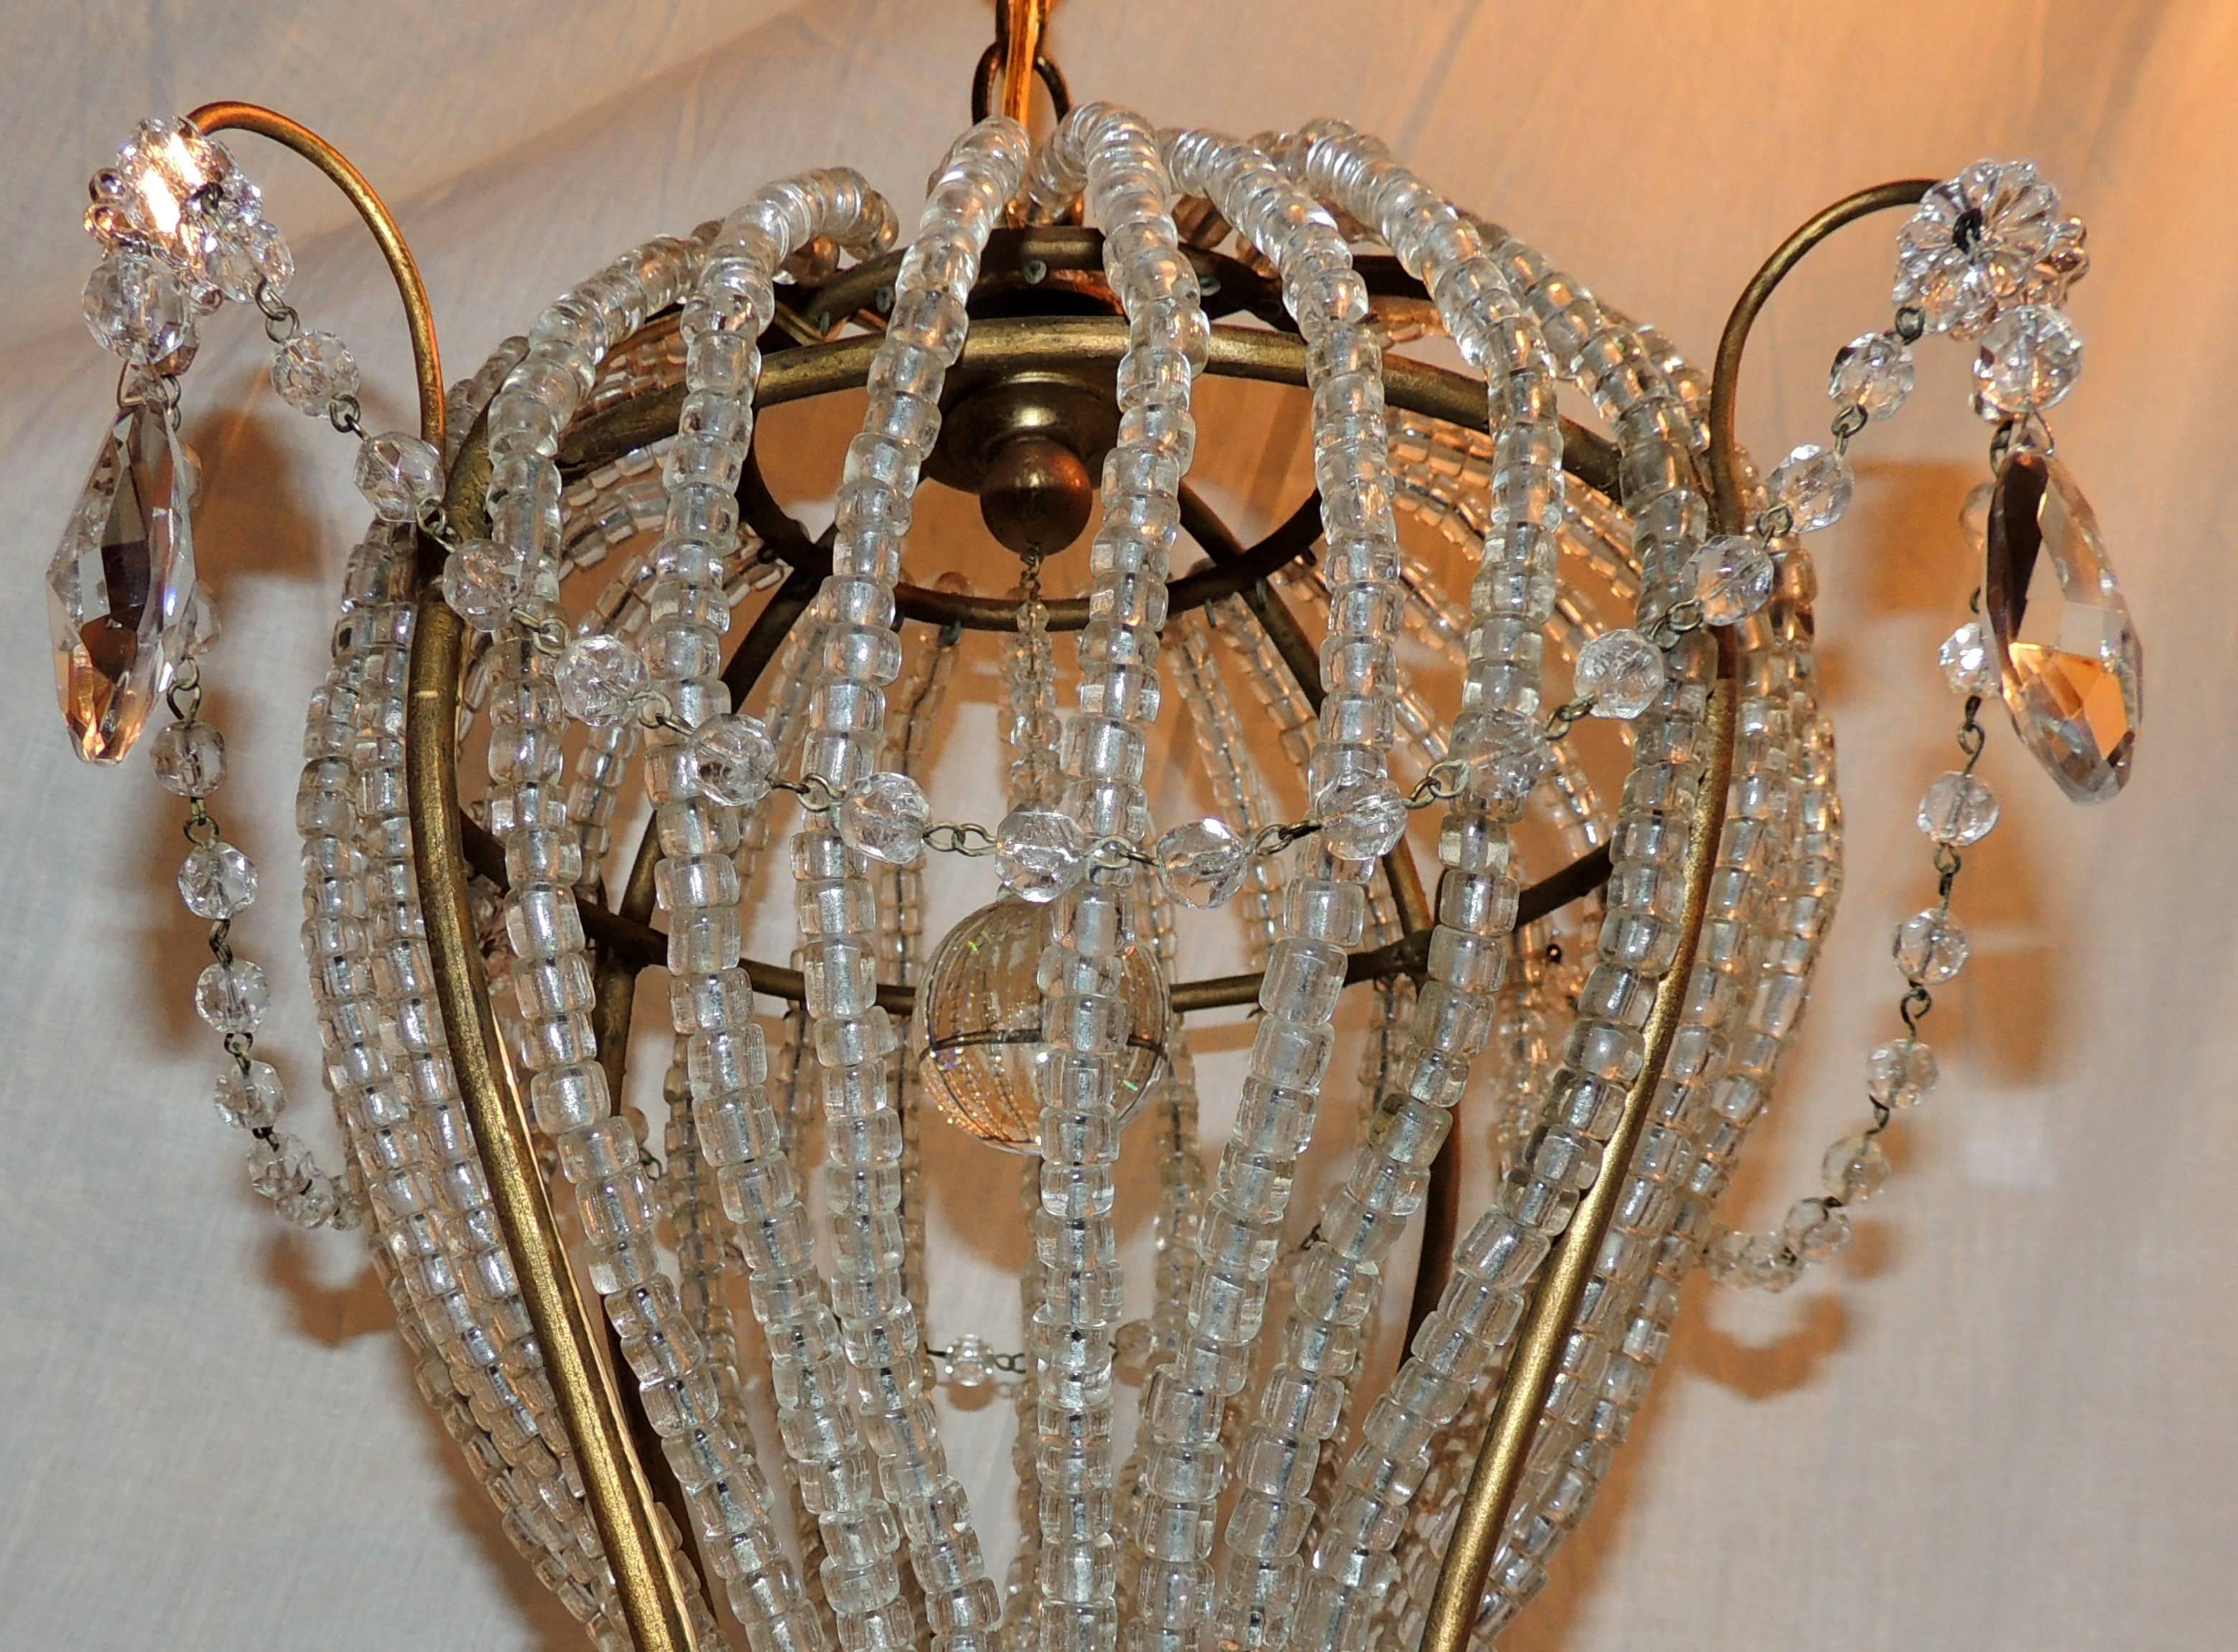 Wonderful Vintage Italy Gilt Beaded Crystal Hot Air Balloon Chandelier Fixture In Good Condition For Sale In Roslyn, NY